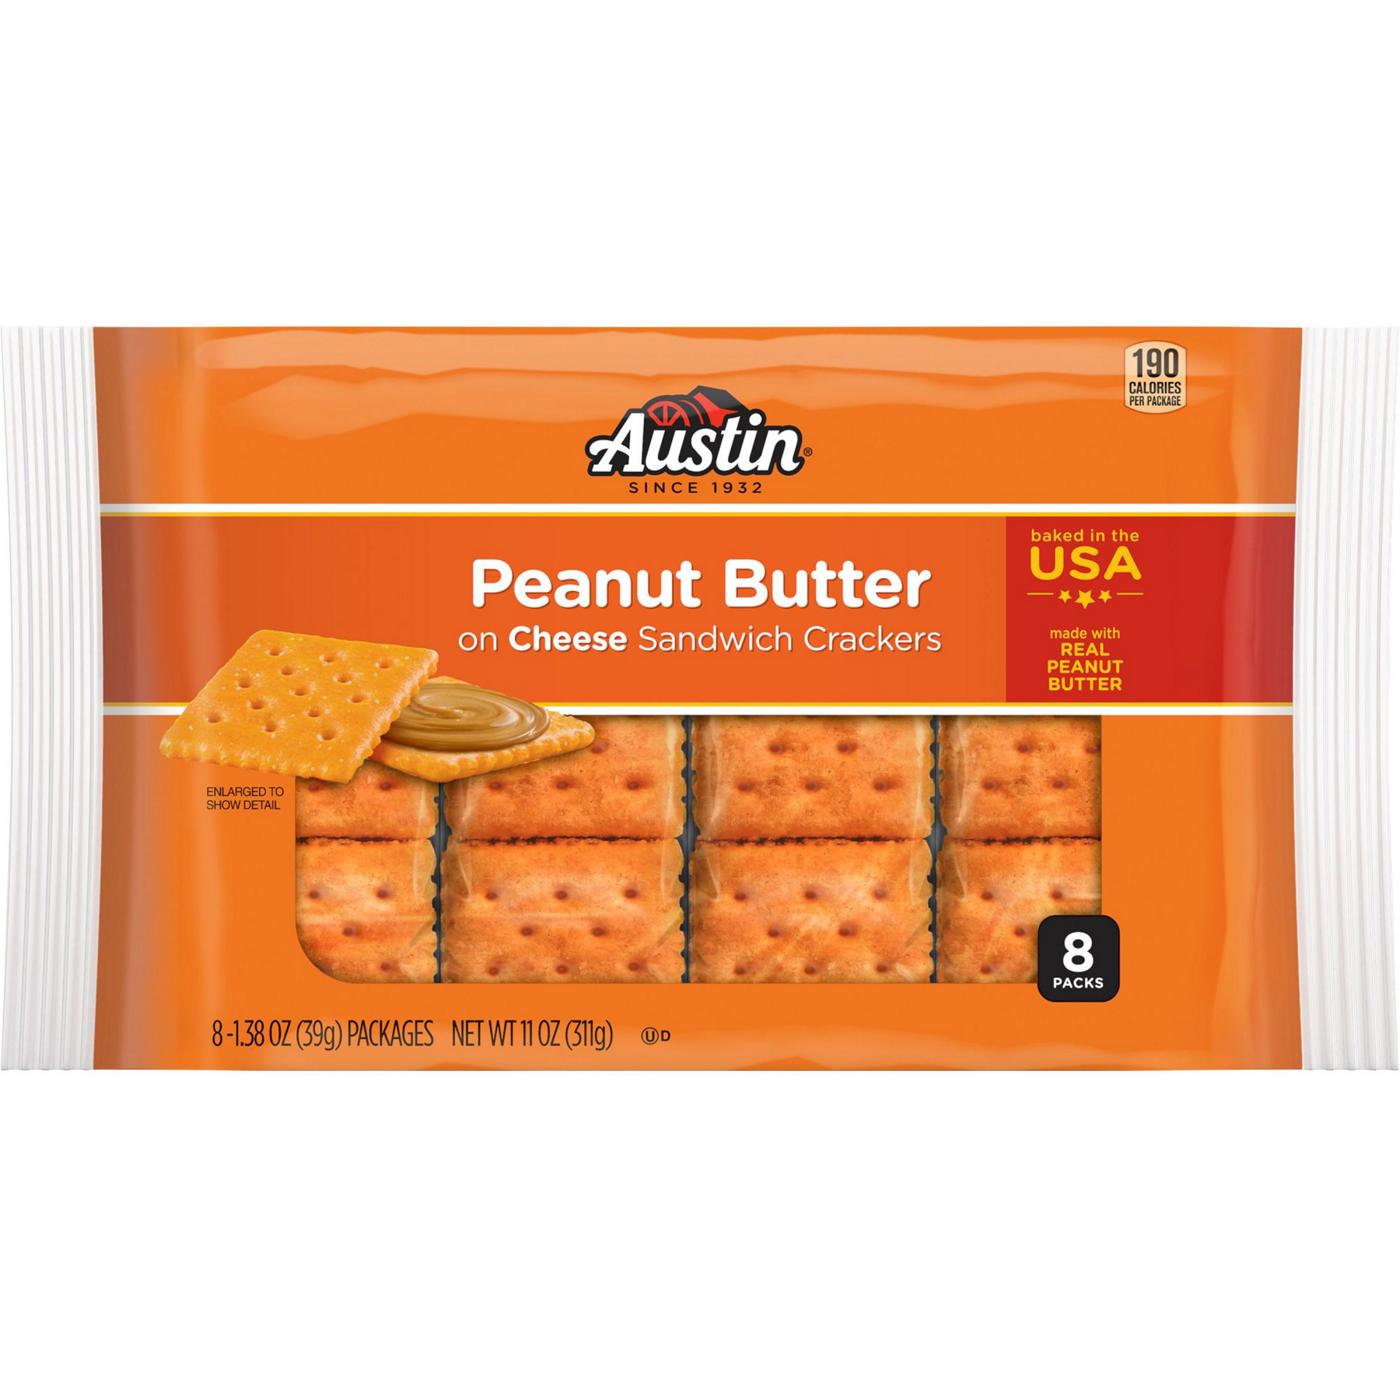 Austin Peanut Butter on Cheese Sandwich Crackers; image 1 of 4